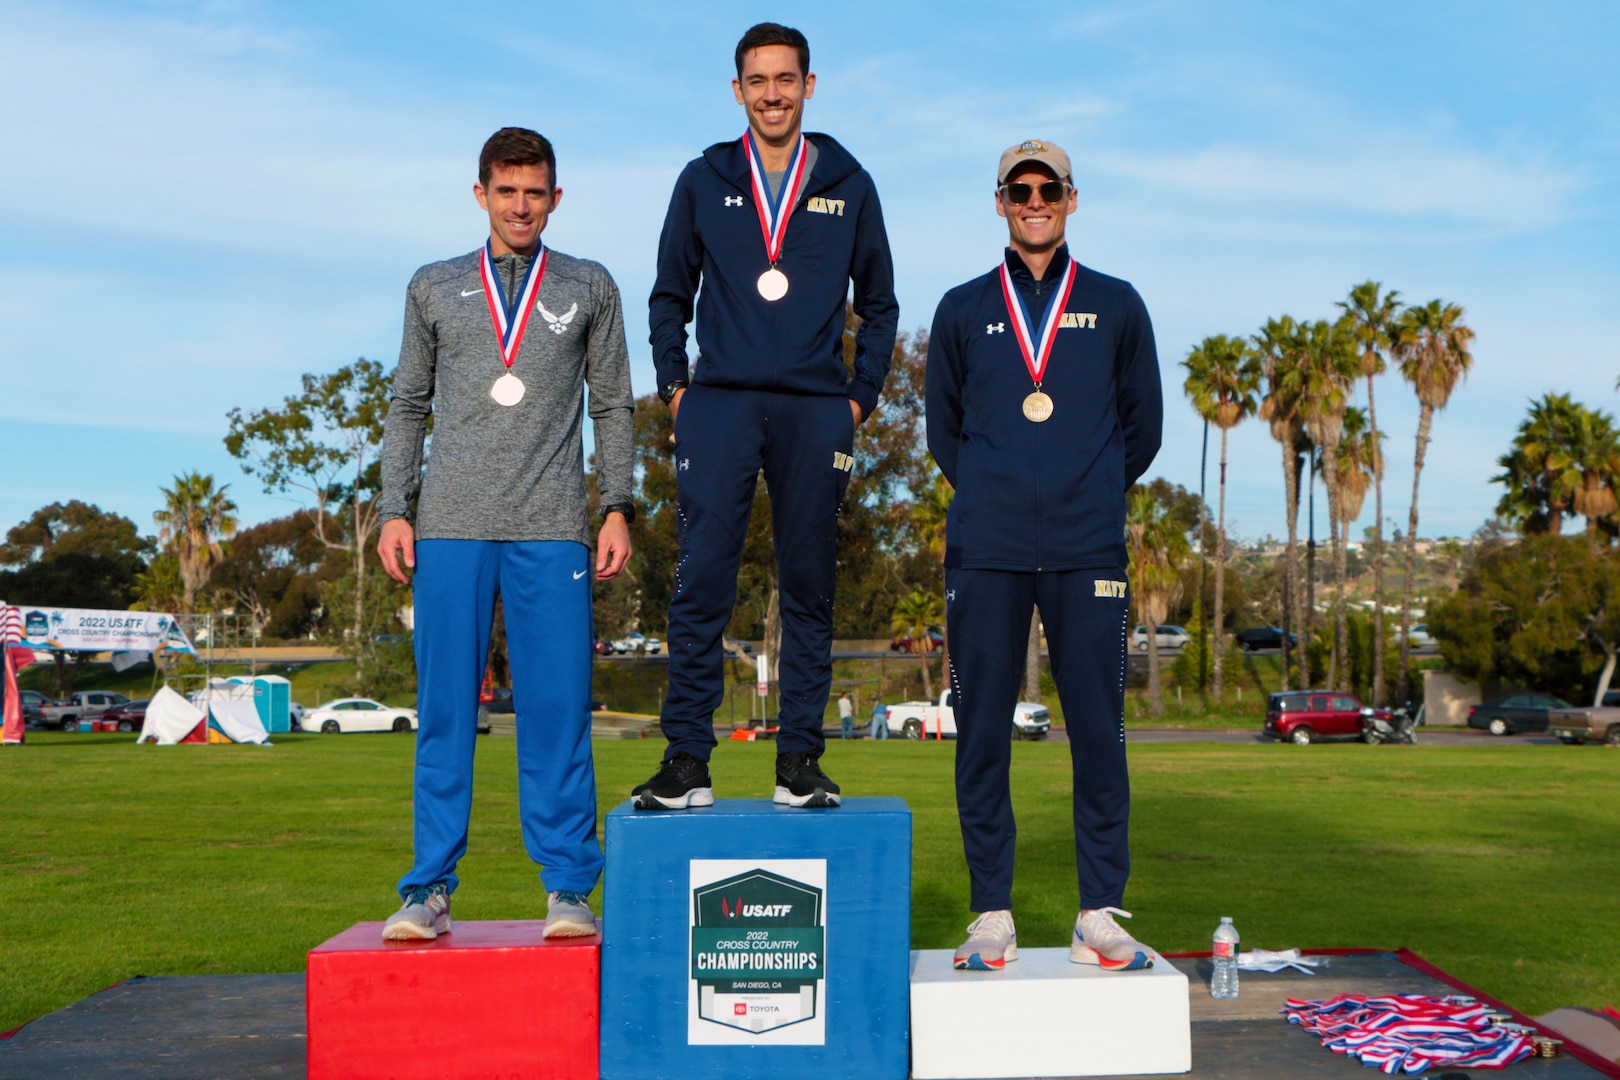 From left to right:  Air Force Major Matthew Williams of Baylor University, Texas; Navy Lt Stanley Linton of NSA Mid-South, Tenn.; and Lt j.g. Zachary Swenson of NAS Corpus Christi, Texas take the men's podium during the 2022 Armed Forces Cross Country Championship held in conjunction with the USA Track and Field National Cross Country Championship at Mission Bay Park in San Diego, Calif. on January 8th.  Runners from the Marine Corps, Navy (with Coast Guard) and Air Force compete for gold.  (Department of Defense Photo - Released)